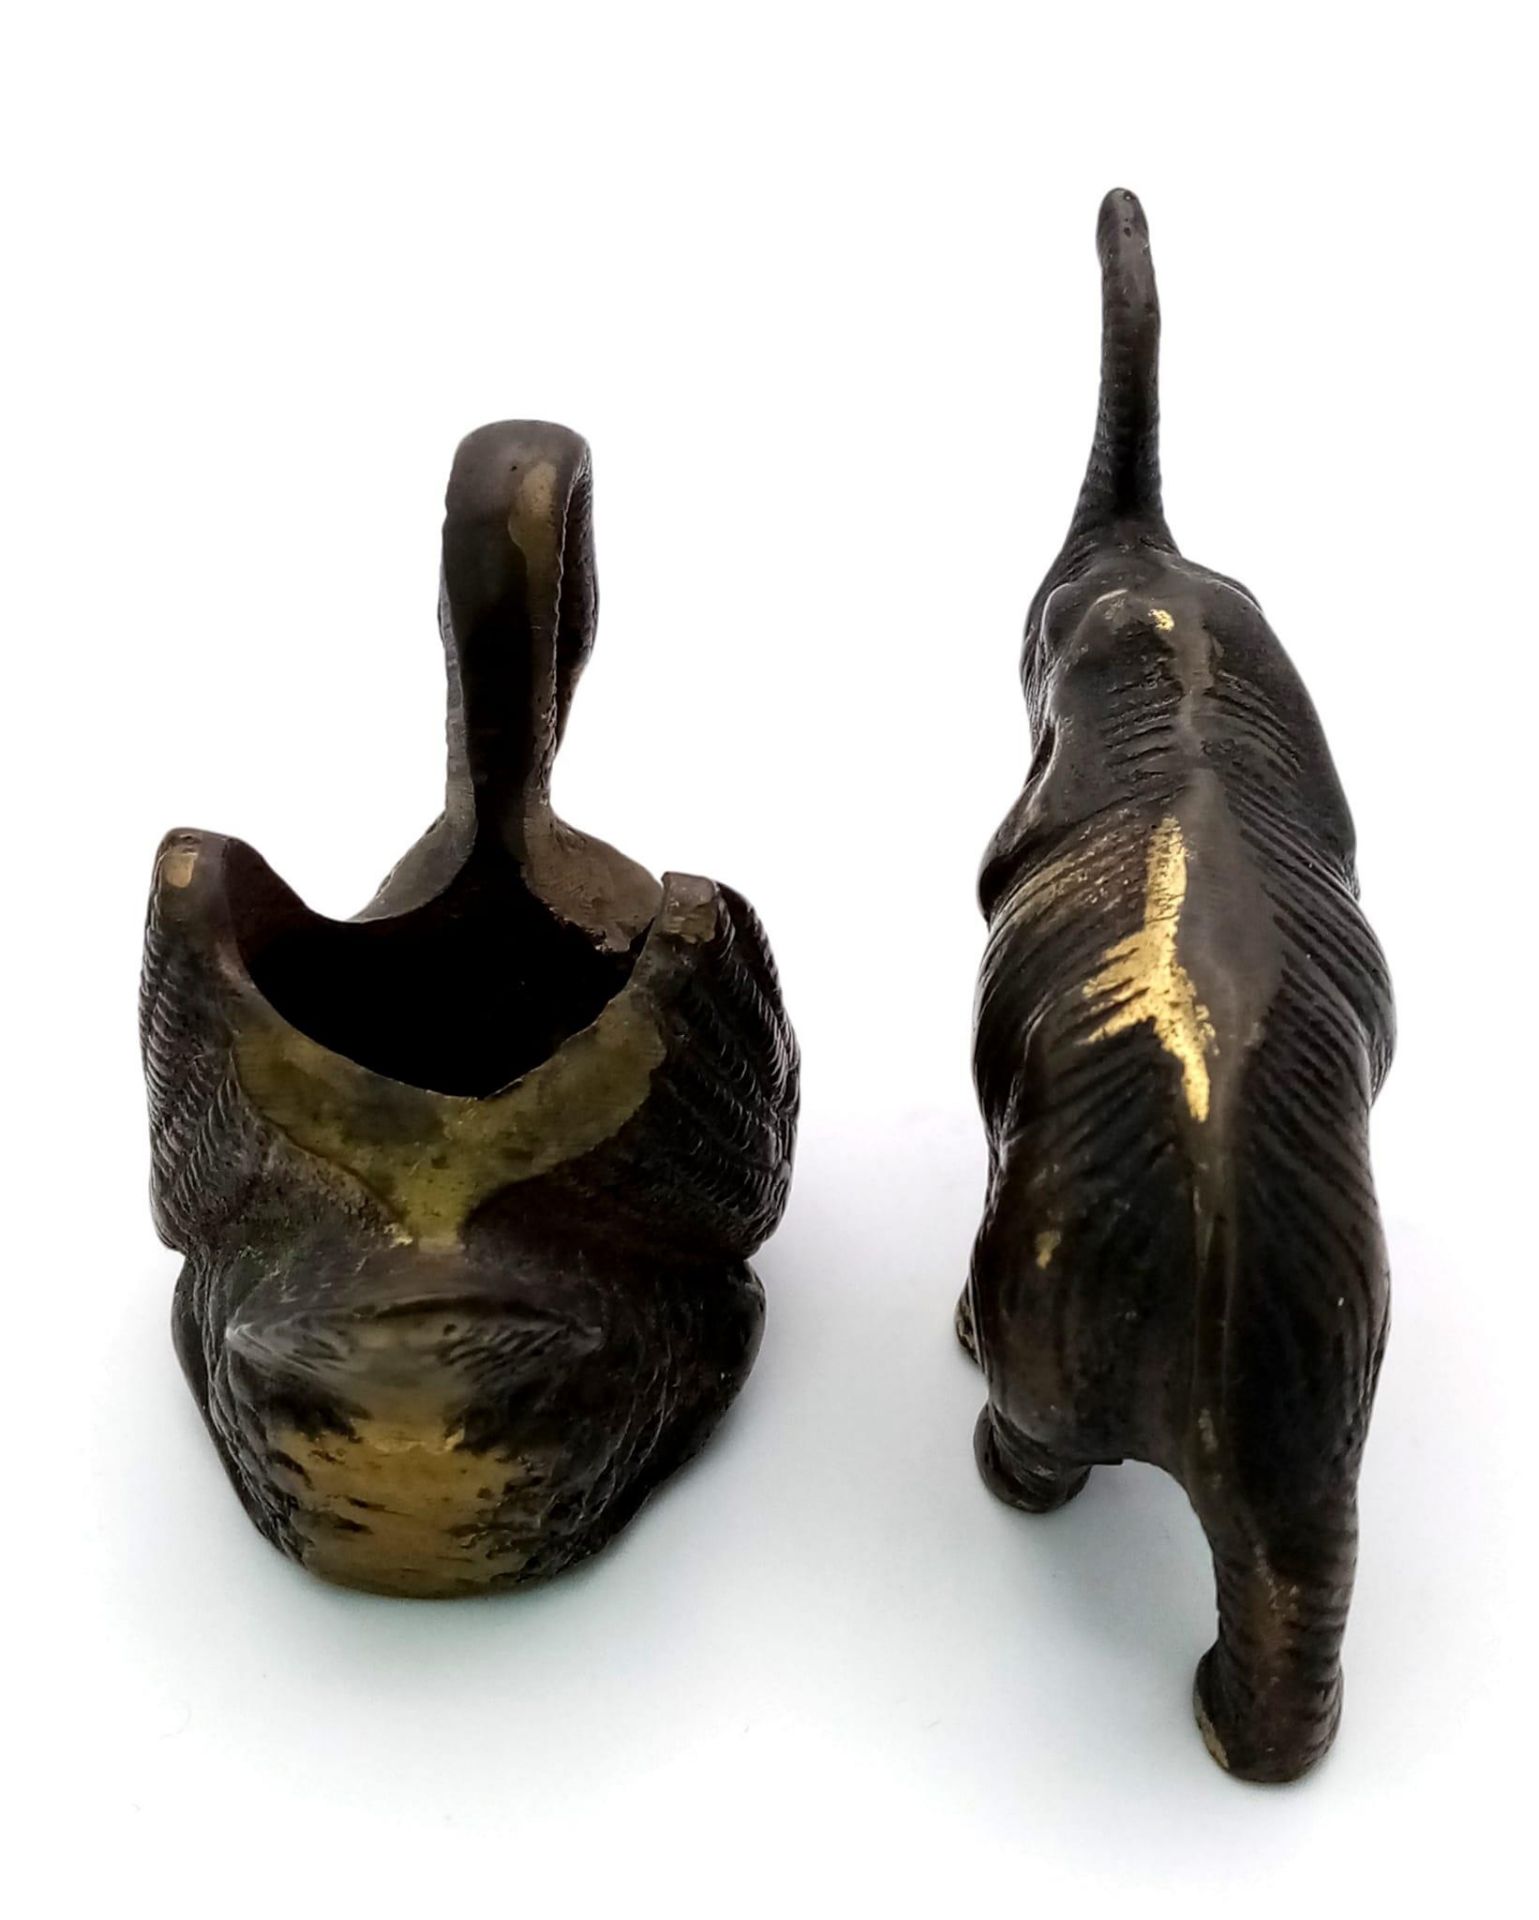 Two Small Vintage Brass Animal Figures. An Elephant and Swan - Both with wonderful patinas. Elephant - Image 6 of 7